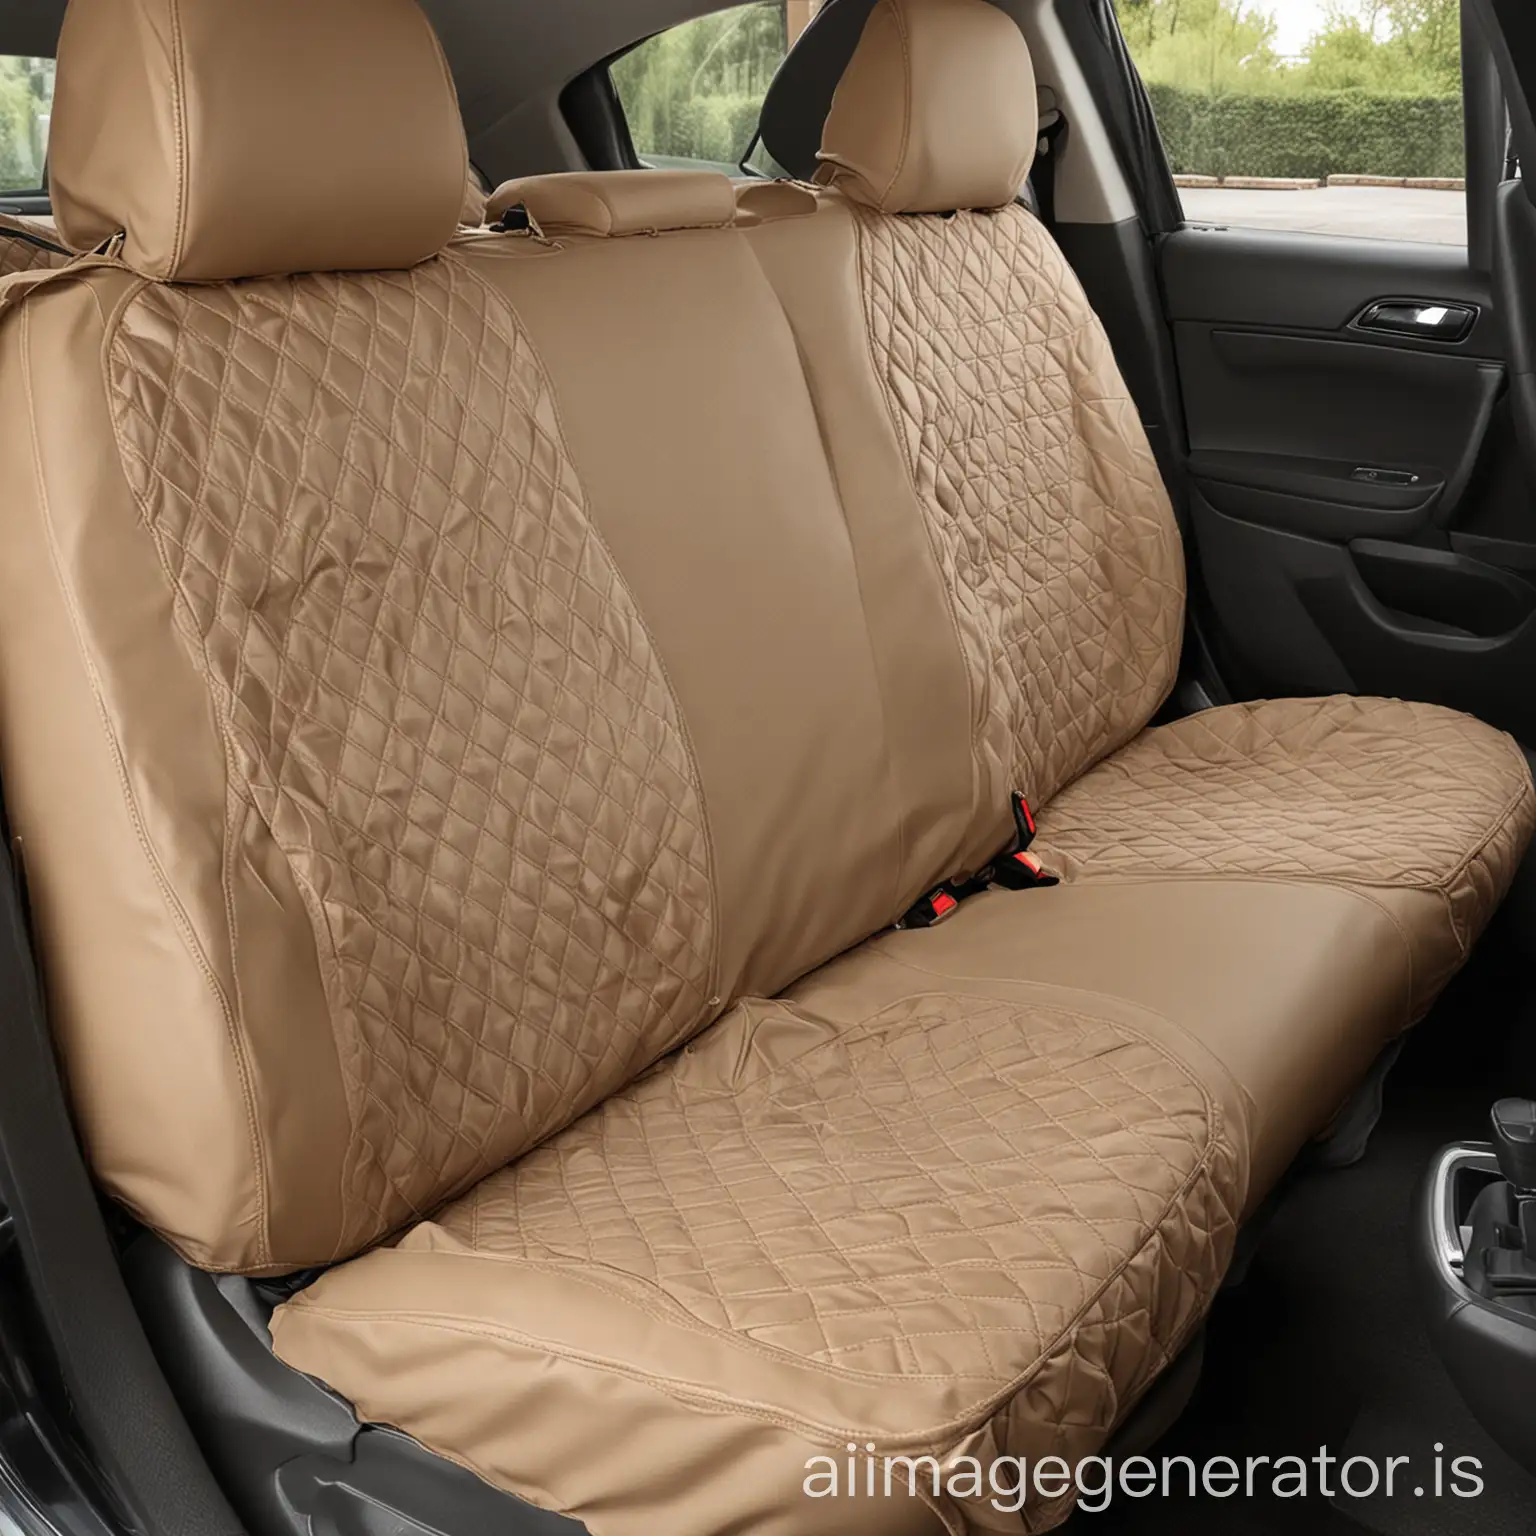 Colorful-Car-Seat-Cover-Pattern-Designs